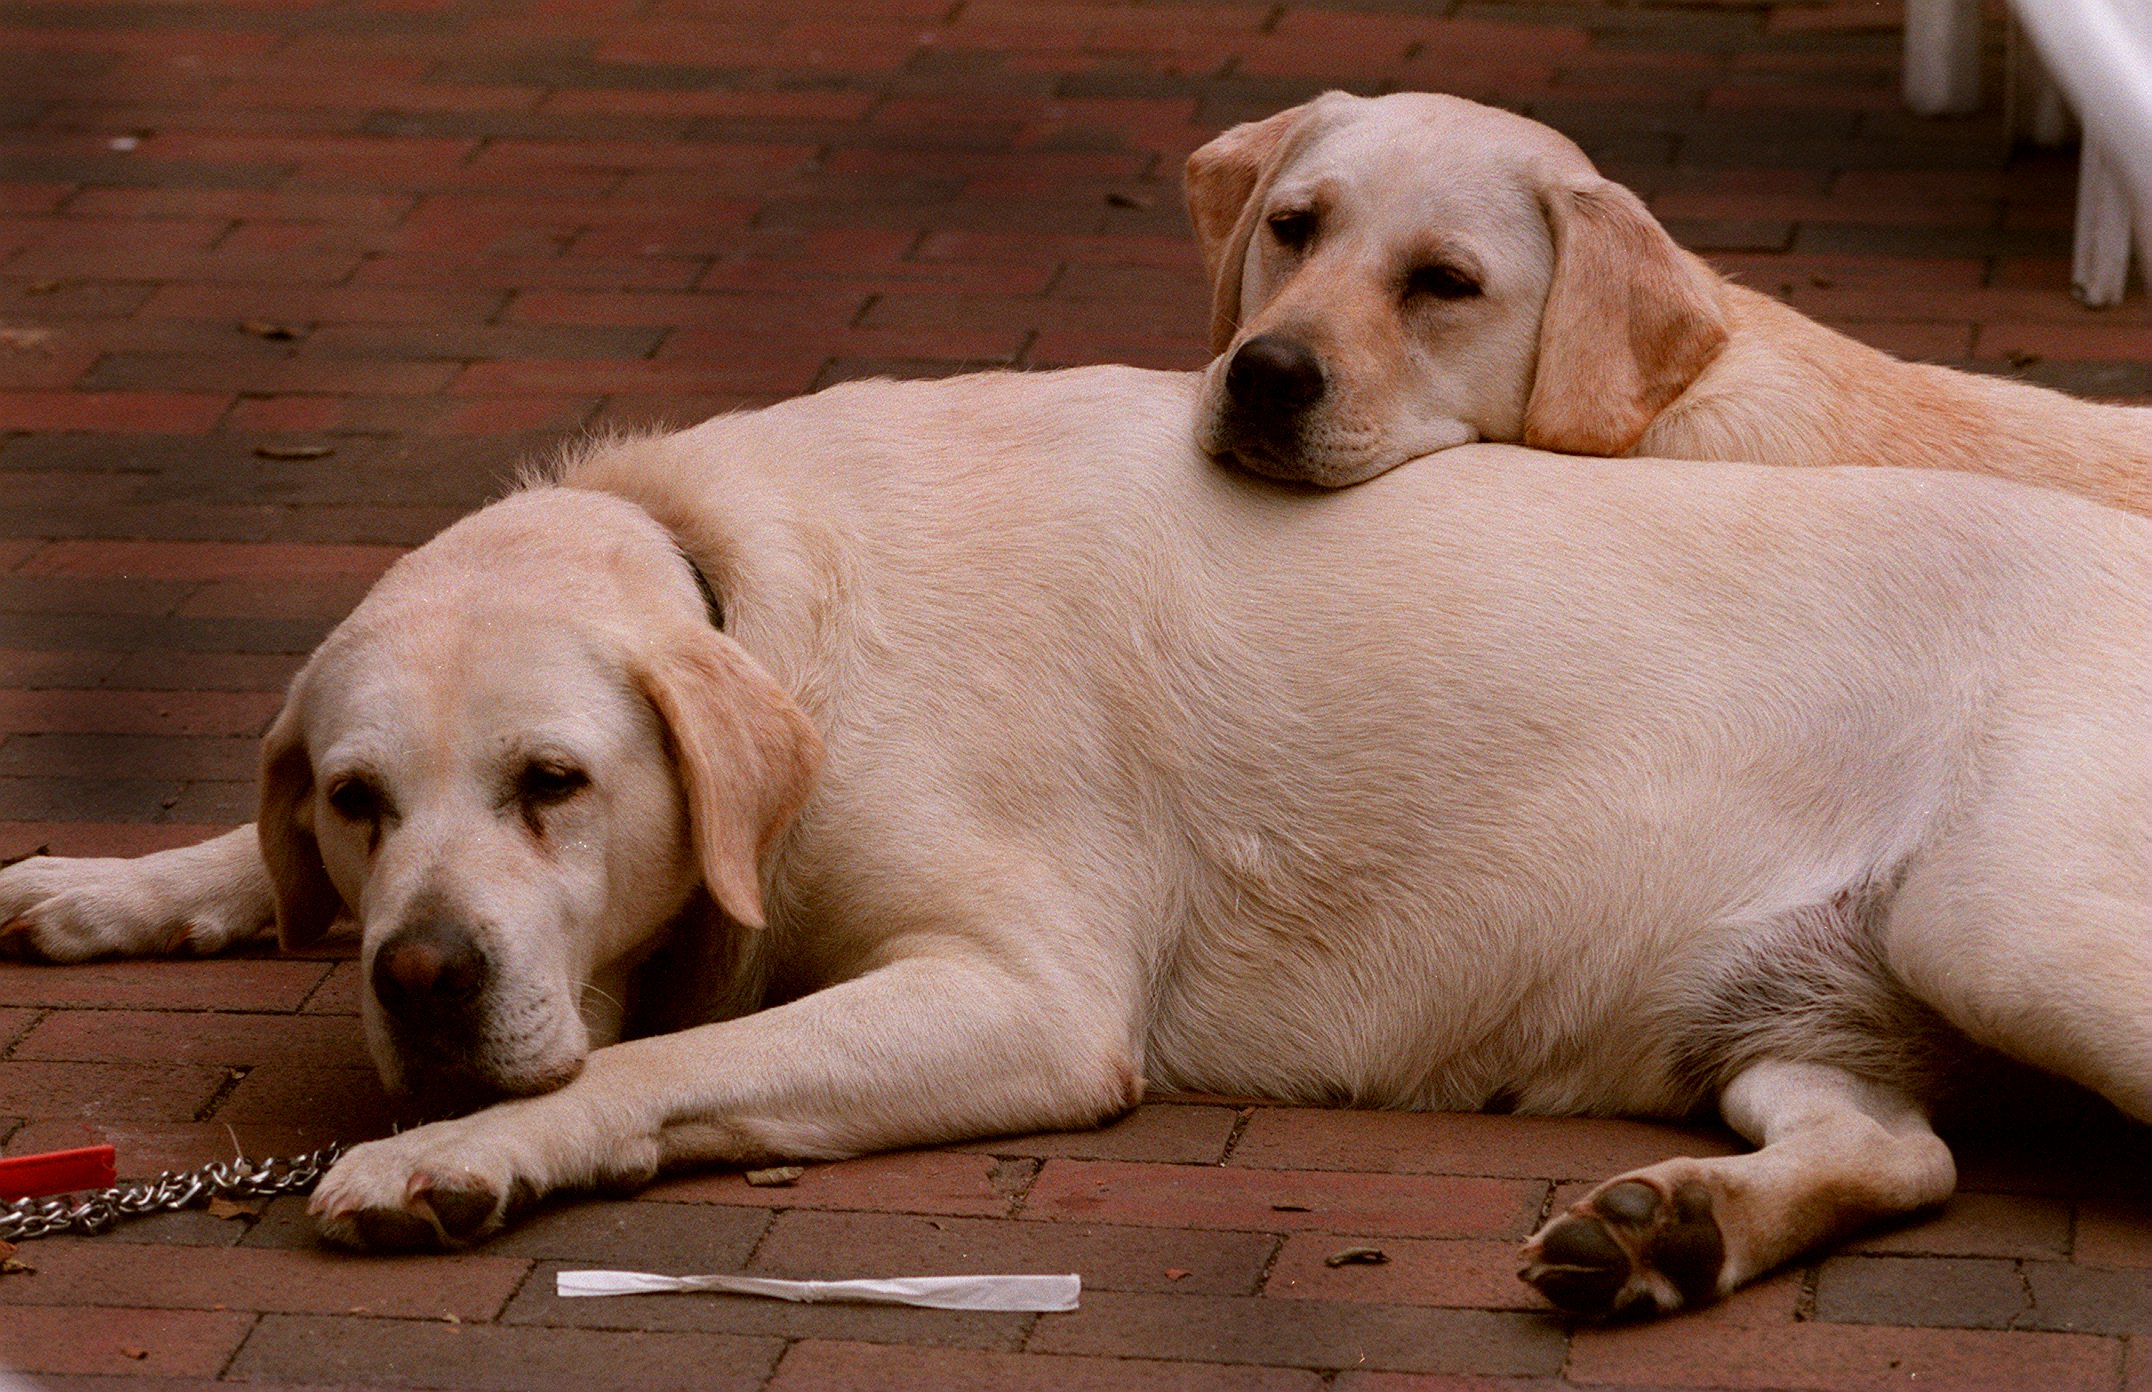 NANTUCKET, MA - SEPTEMBER 8: Two labradors wait for their owner at a restaurant on Main Street in Nantucket. (Photo by Bill Brett/The Boston Globe via Getty Images)